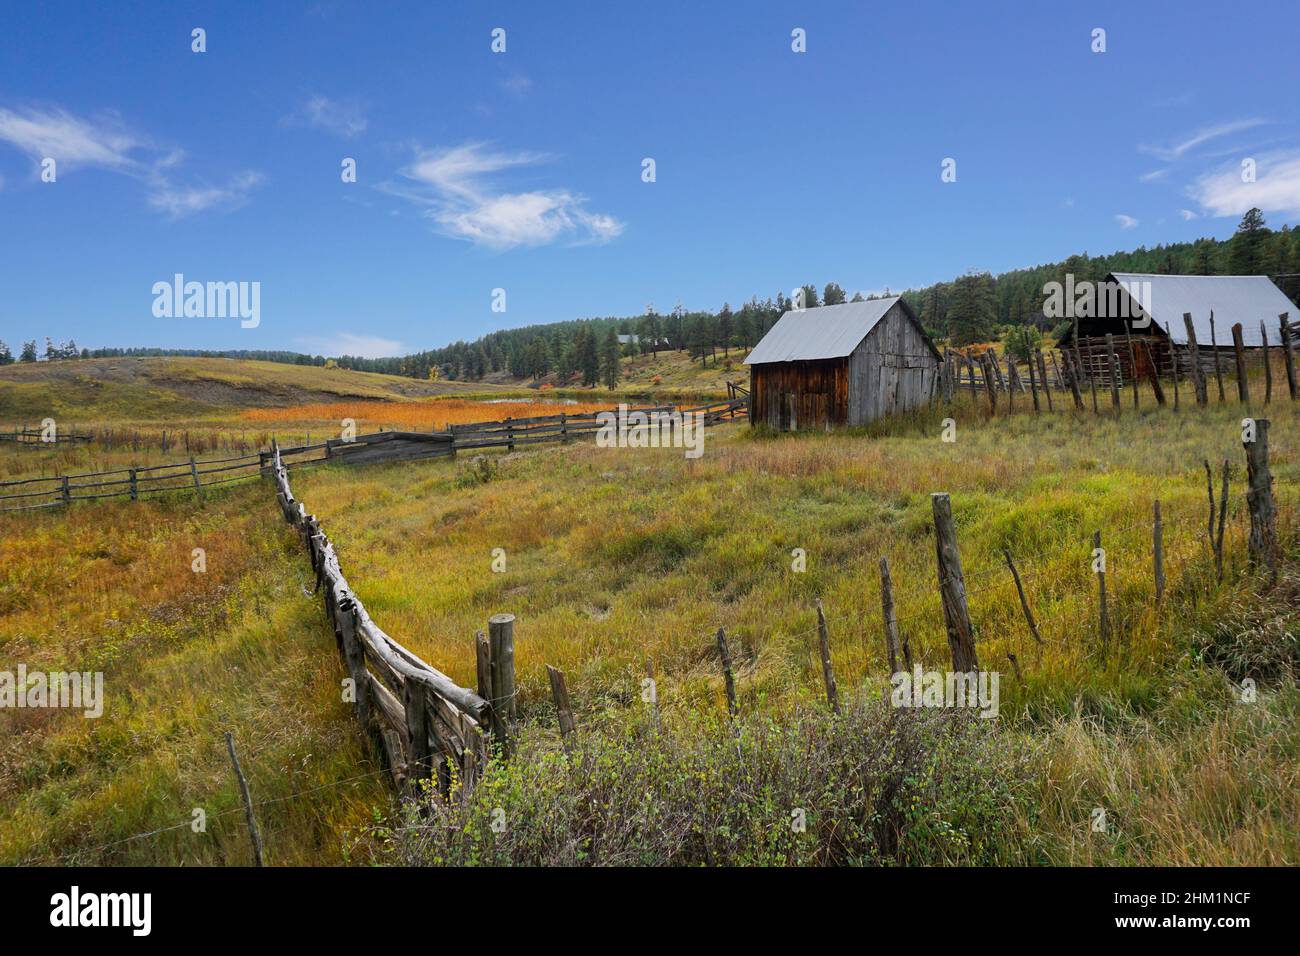 An old ranch with fences and rustic wooden farm buildings in Colorado. An Autumn scene under a blue sky. Stock Photo